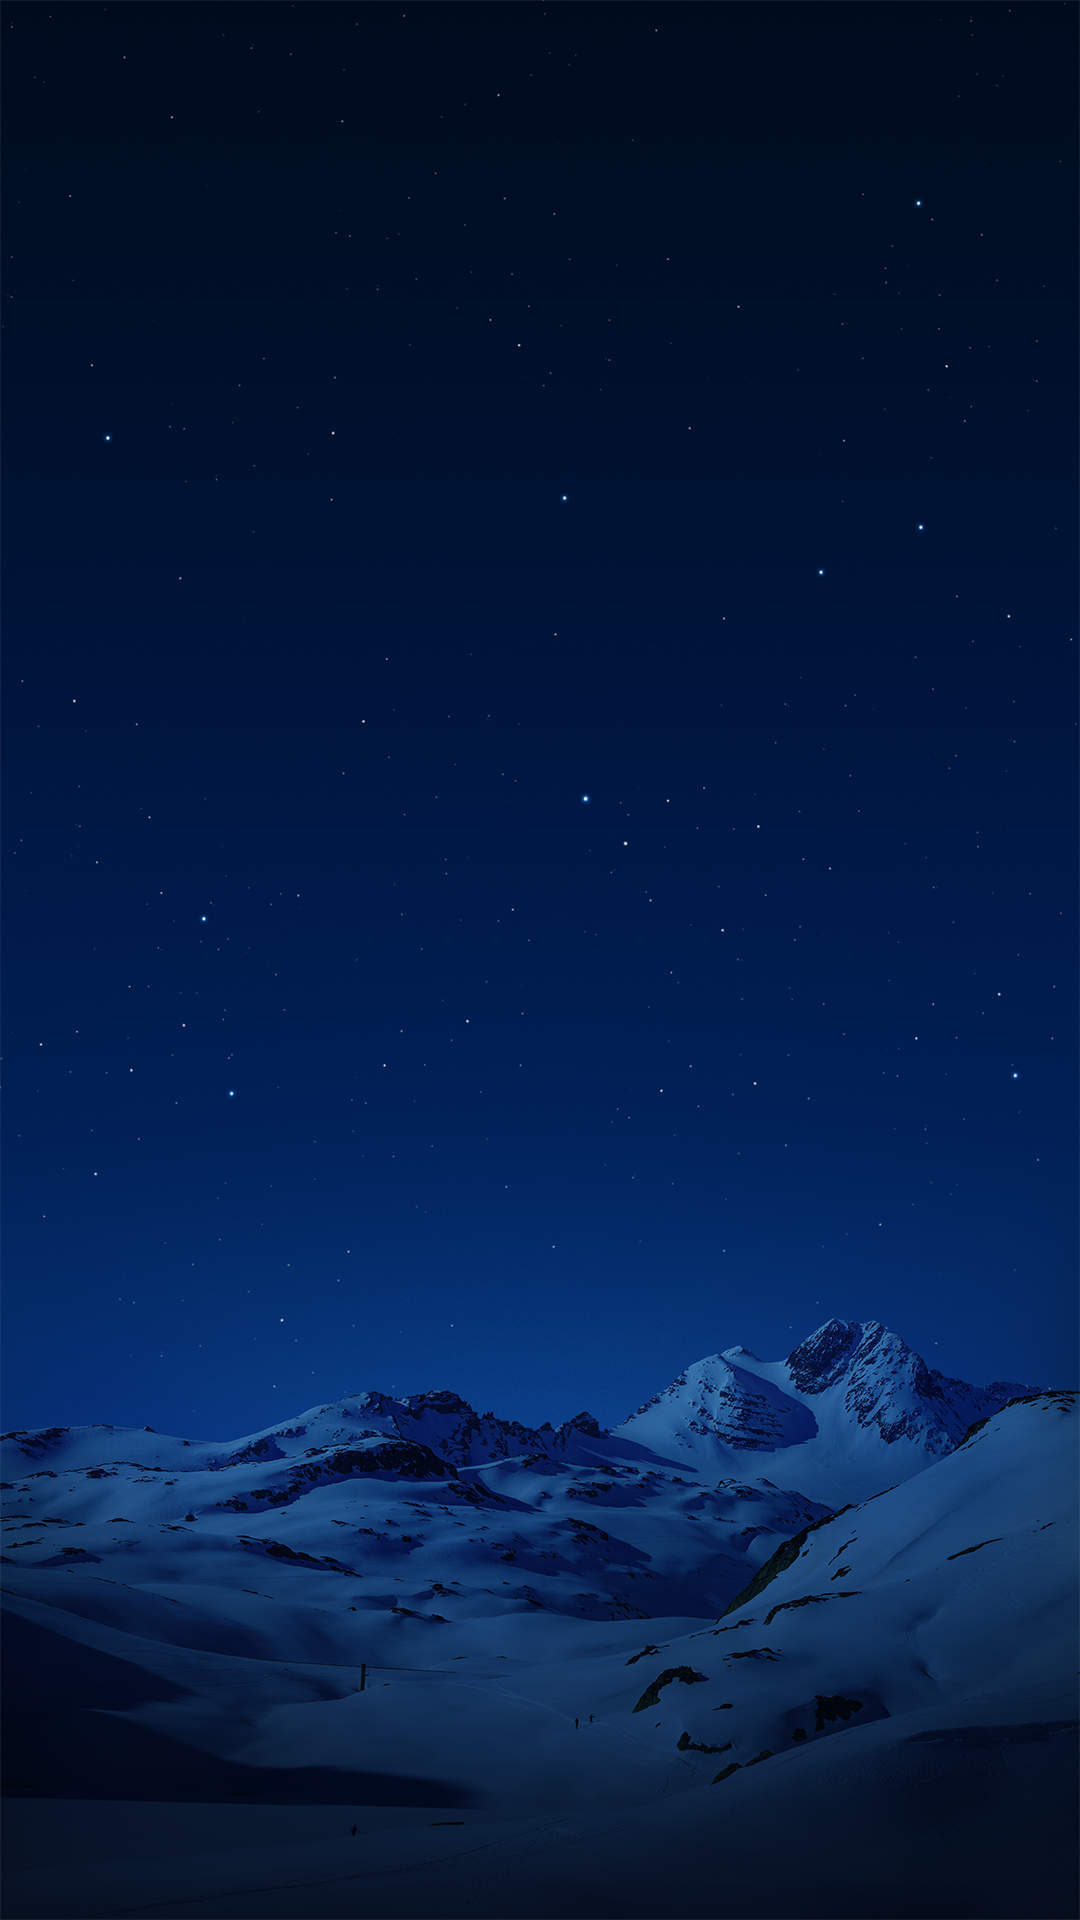 wallpaper picture download,sky,blue,atmosphere,night,mountain range